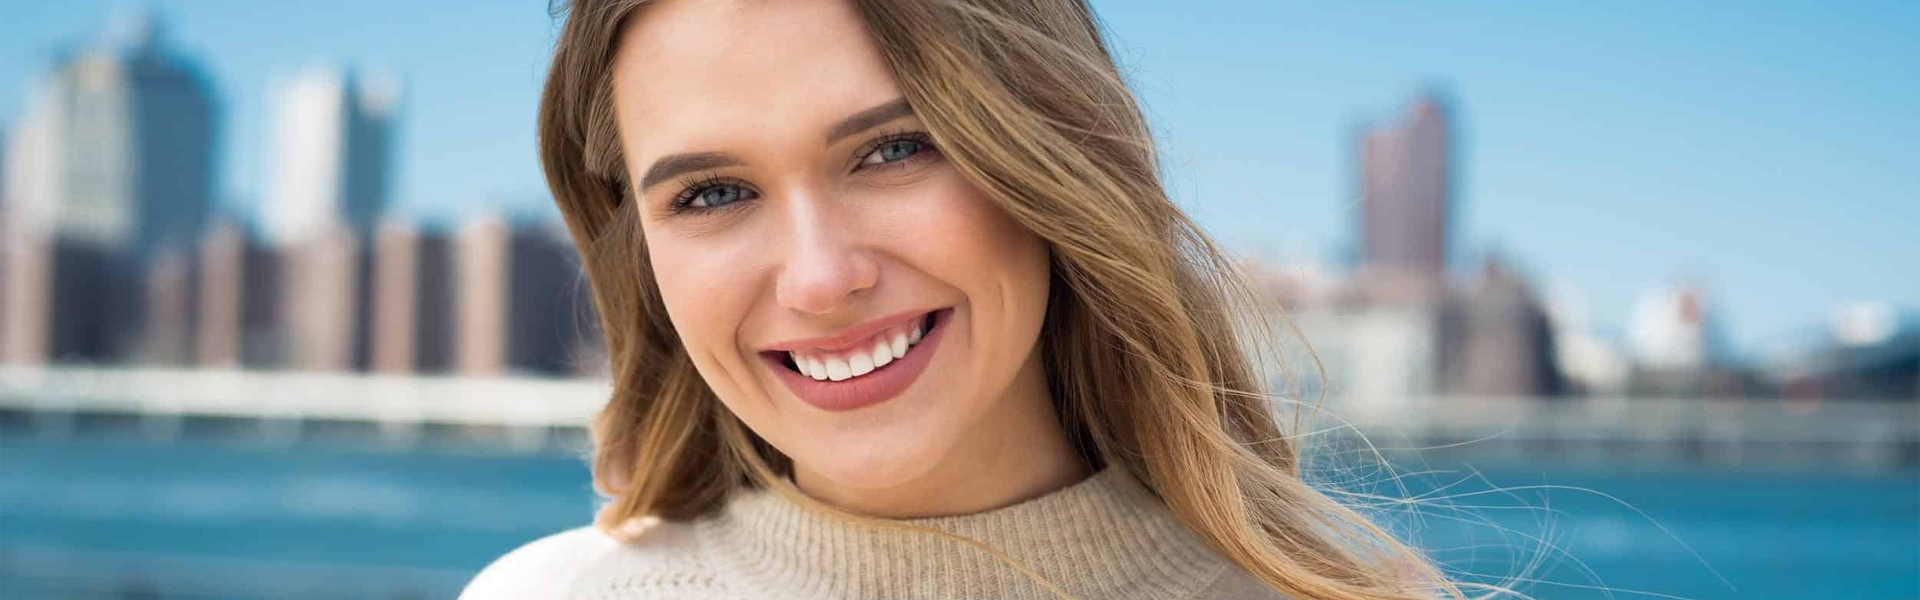 Improve Your Smile with the Best Benefits of Dental Veneers